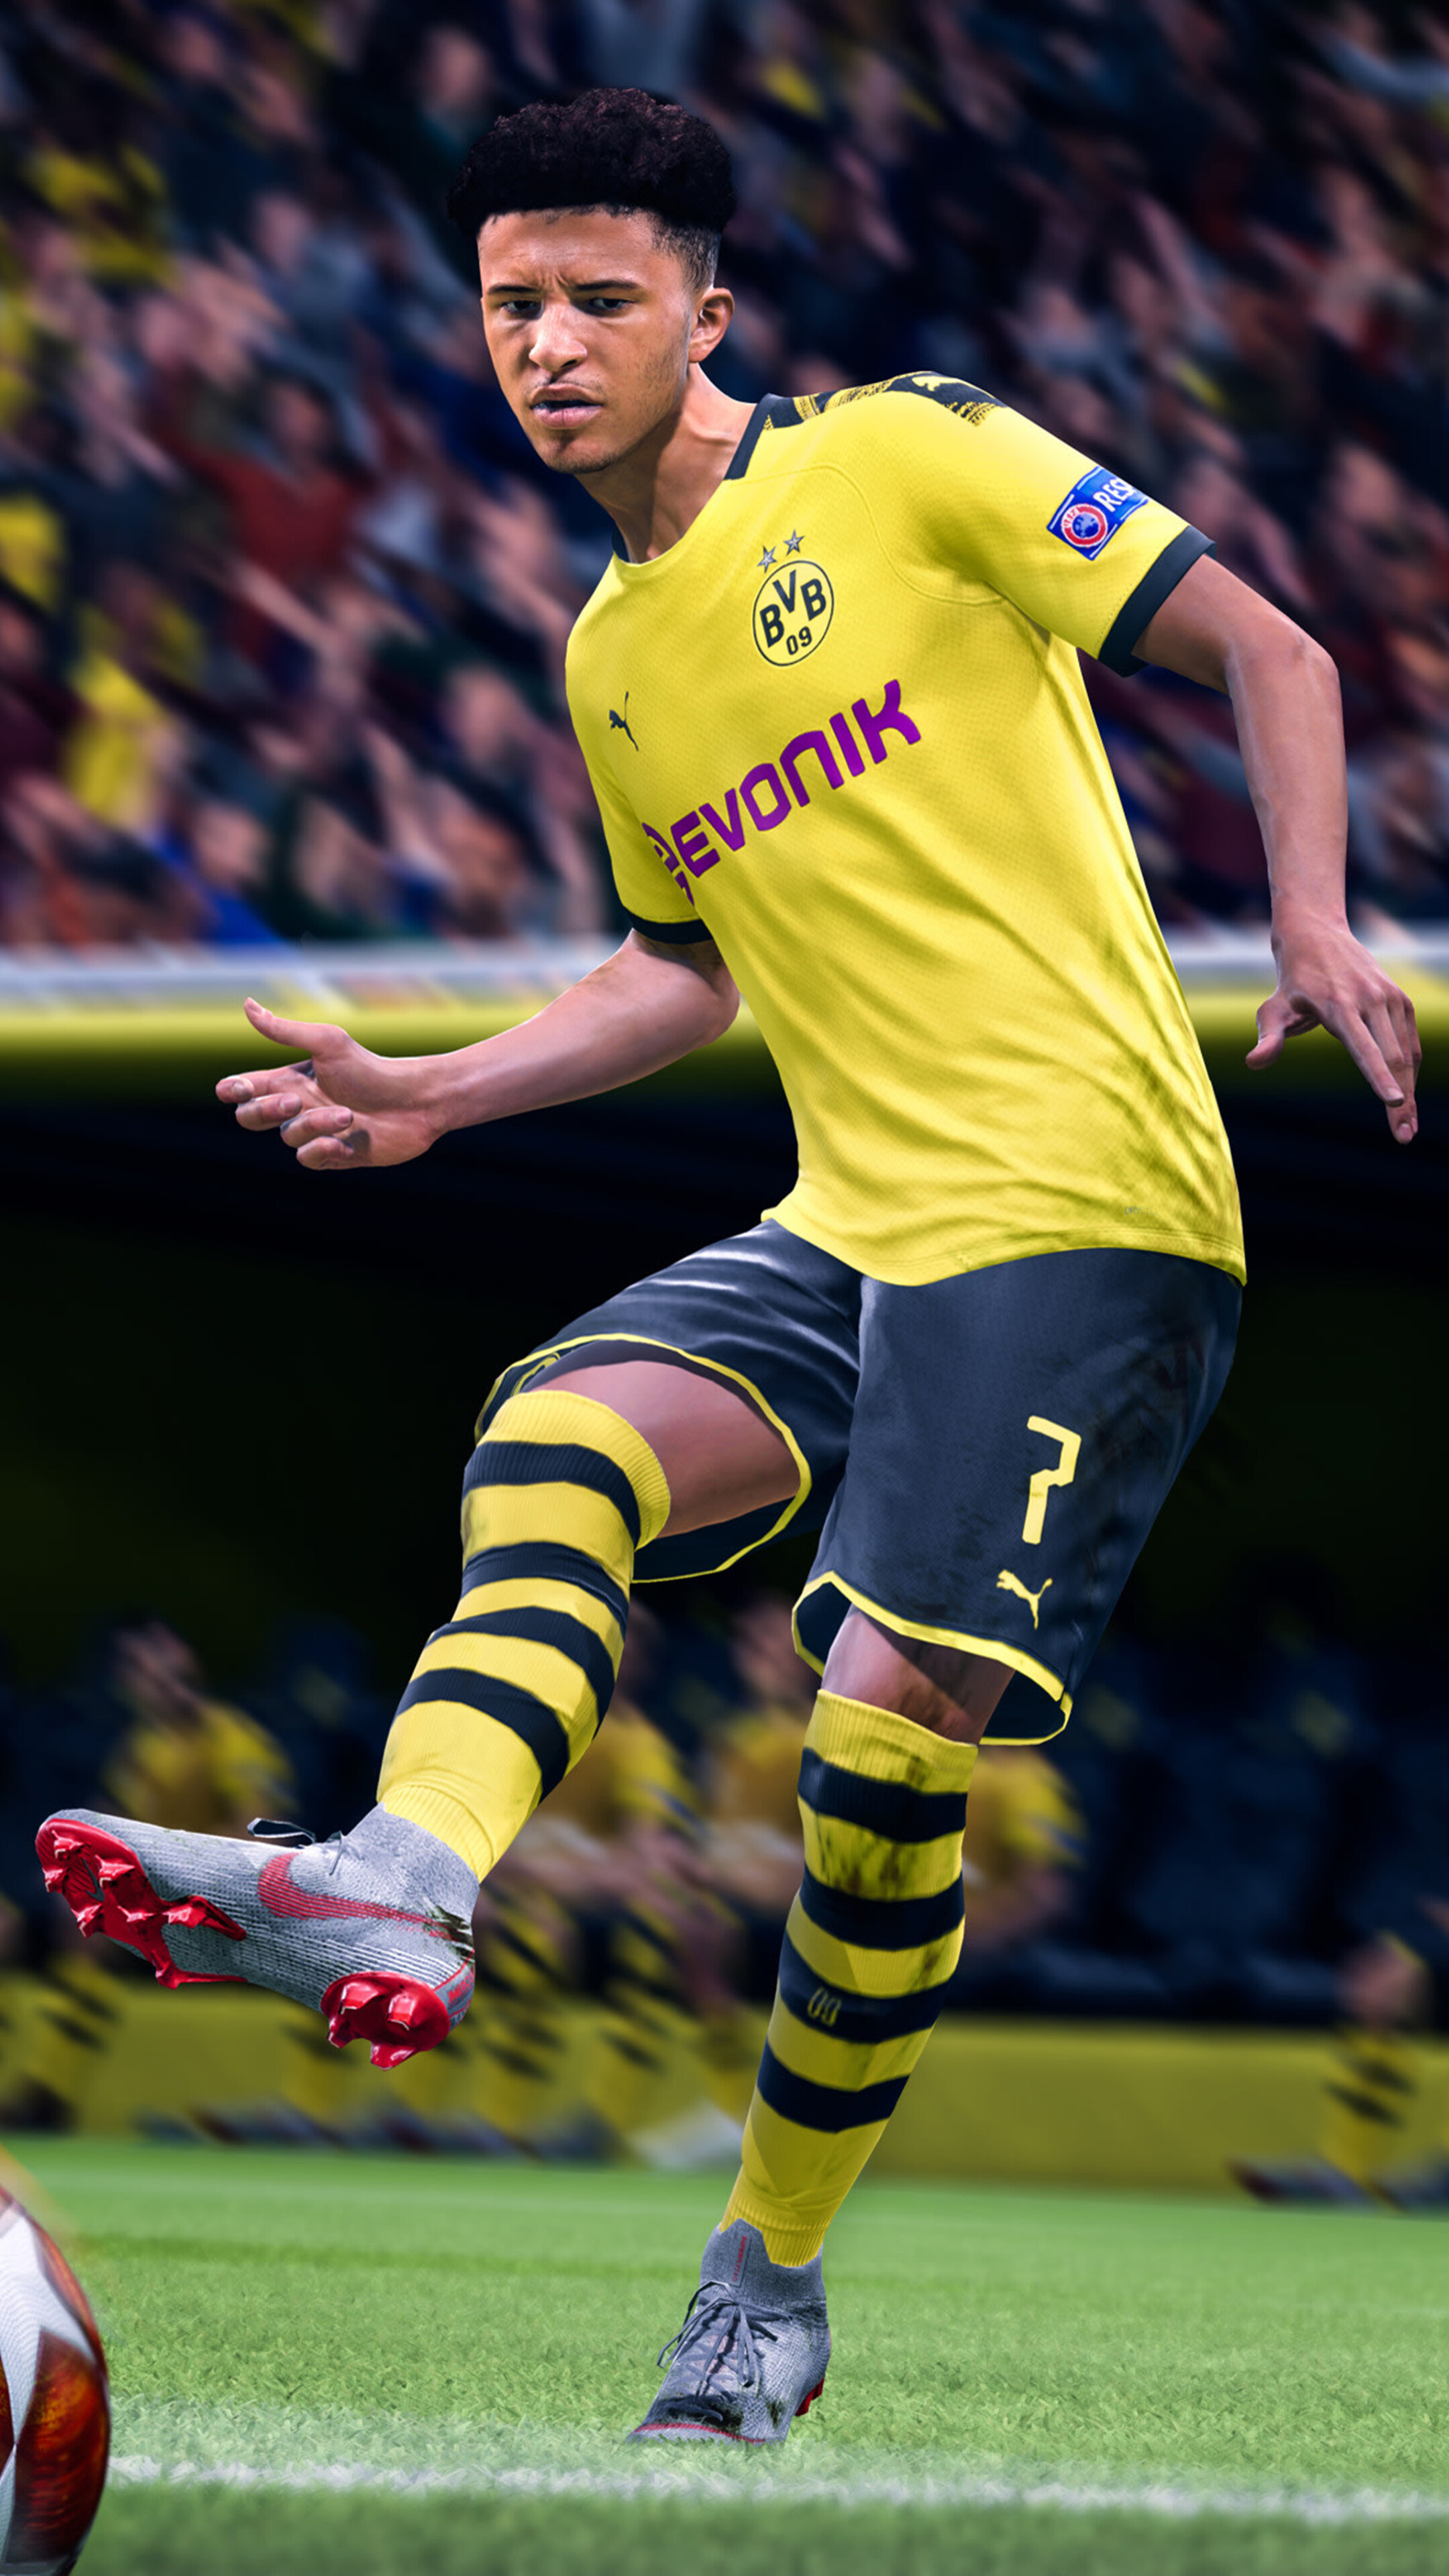 FIFA Soccer, Striking wallpapers, Dynamic gameplay, Immersive experience, 2160x3840 4K Phone